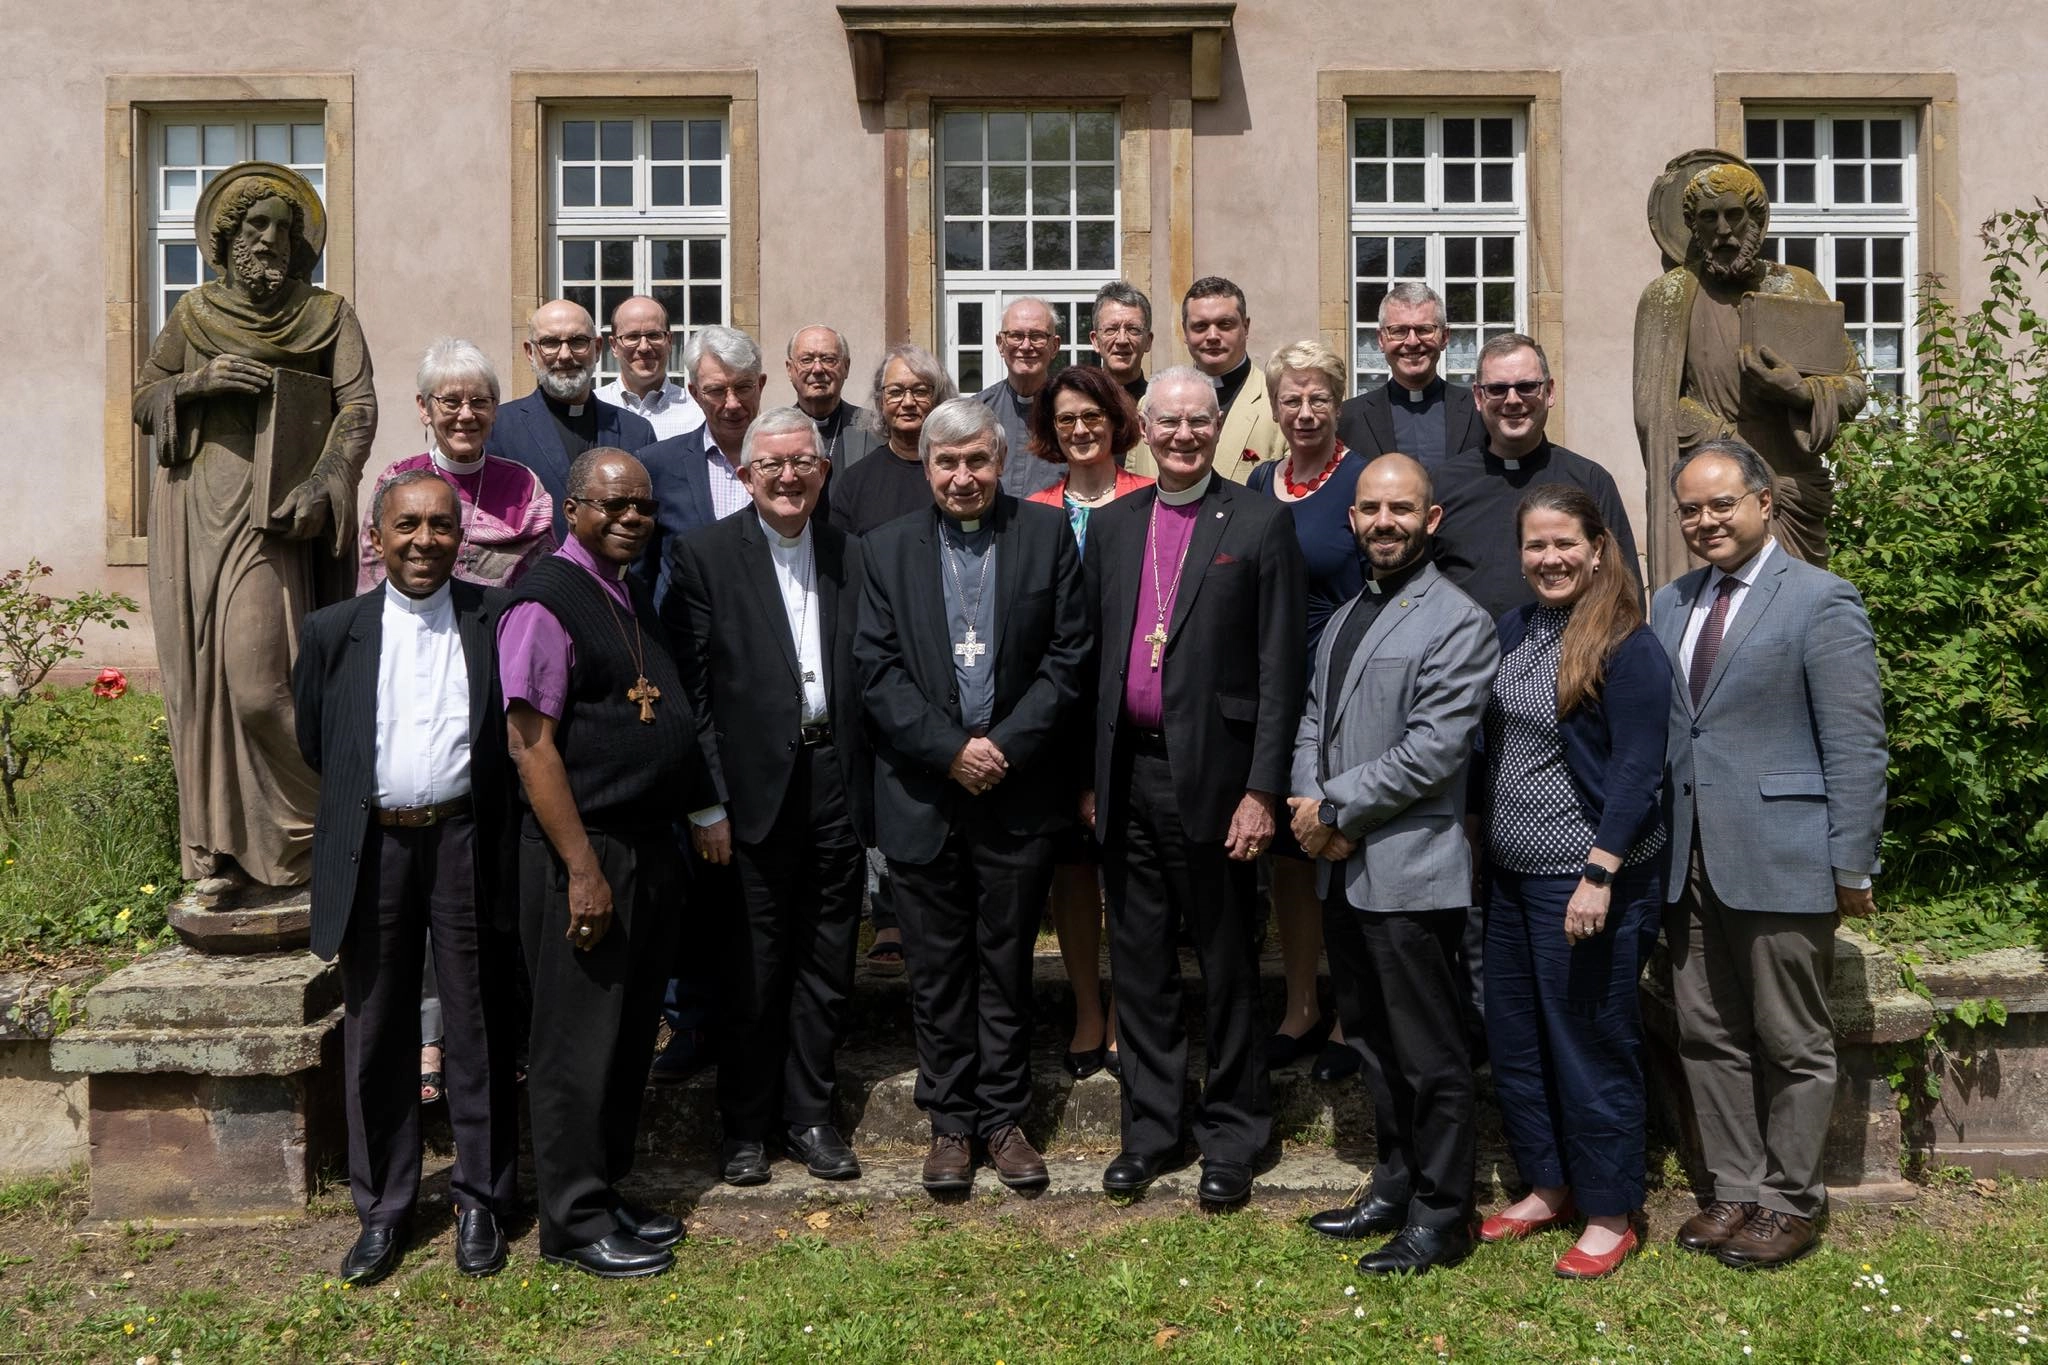 The members of ARCIC III gathered in Strasbourg, France for their annual meeting